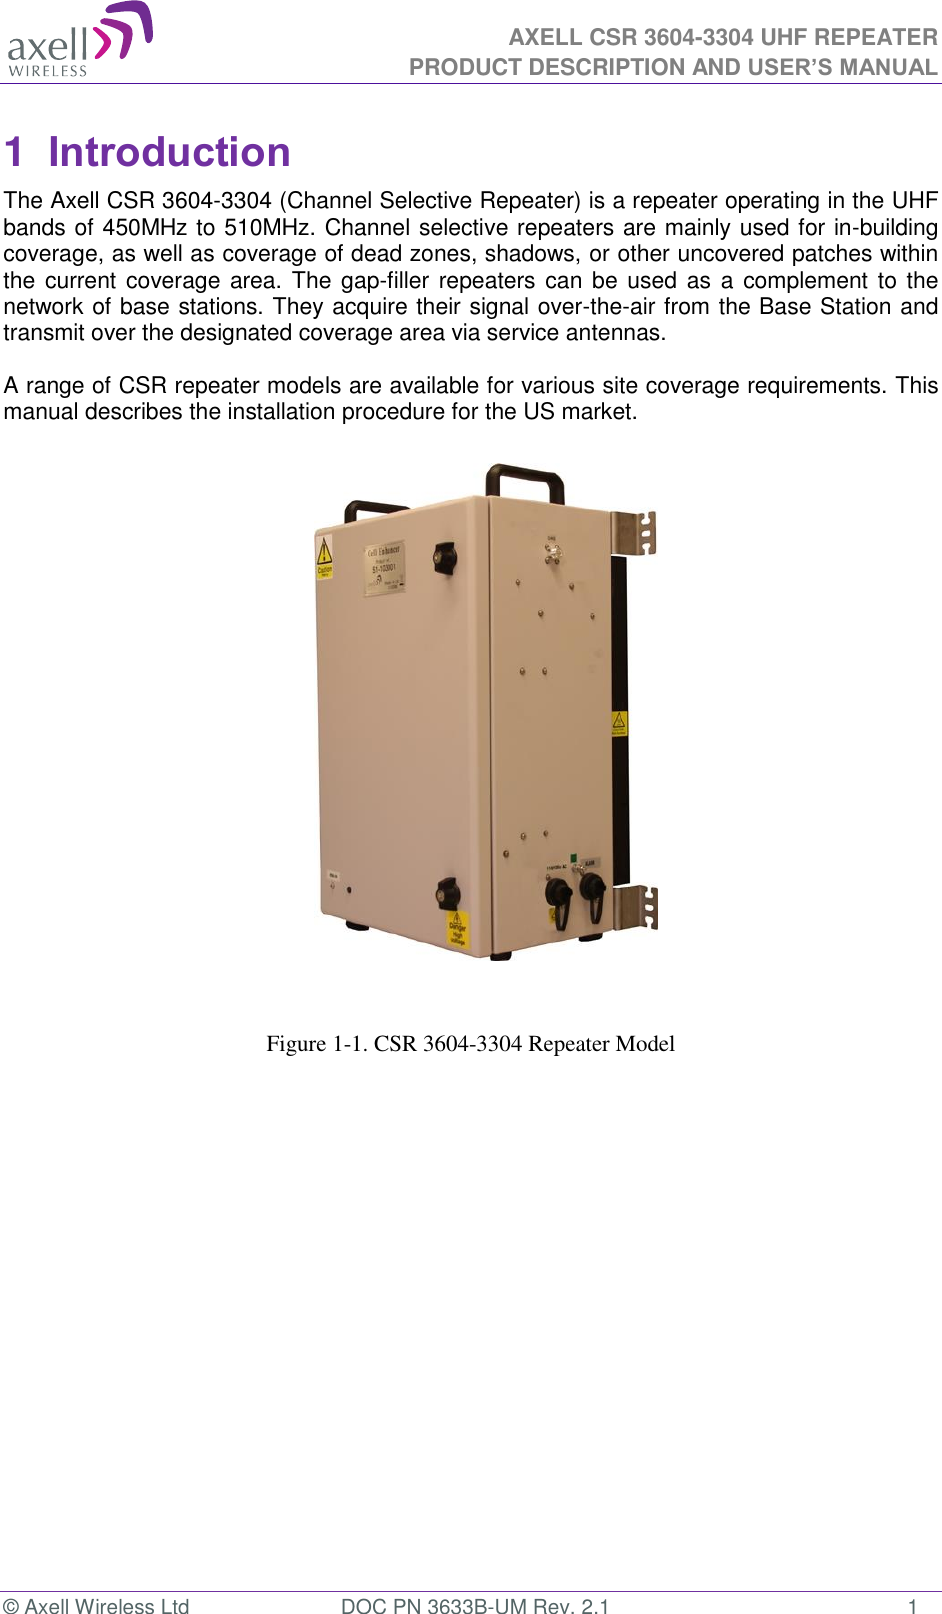  AXELL CSR 3604-3304 UHF REPEATER PRODUCT DESCRIPTION AND USER’S MANUAL  © Axell Wireless Ltd  DOC PN 3633B-UM Rev. 2.1  1 1  Introduction  The Axell CSR 3604-3304 (Channel Selective Repeater) is a repeater operating in the UHF bands of 450MHz to 510MHz. Channel selective repeaters are mainly used for in-building coverage, as well as coverage of dead zones, shadows, or other uncovered patches within the current  coverage area. The gap-filler repeaters can  be used as  a complement to the network of base stations. They acquire their signal over-the-air from the Base Station and transmit over the designated coverage area via service antennas.   A range of CSR repeater models are available for various site coverage requirements. This manual describes the installation procedure for the US market.                        Figure 1-1. CSR 3604-3304 Repeater Model 